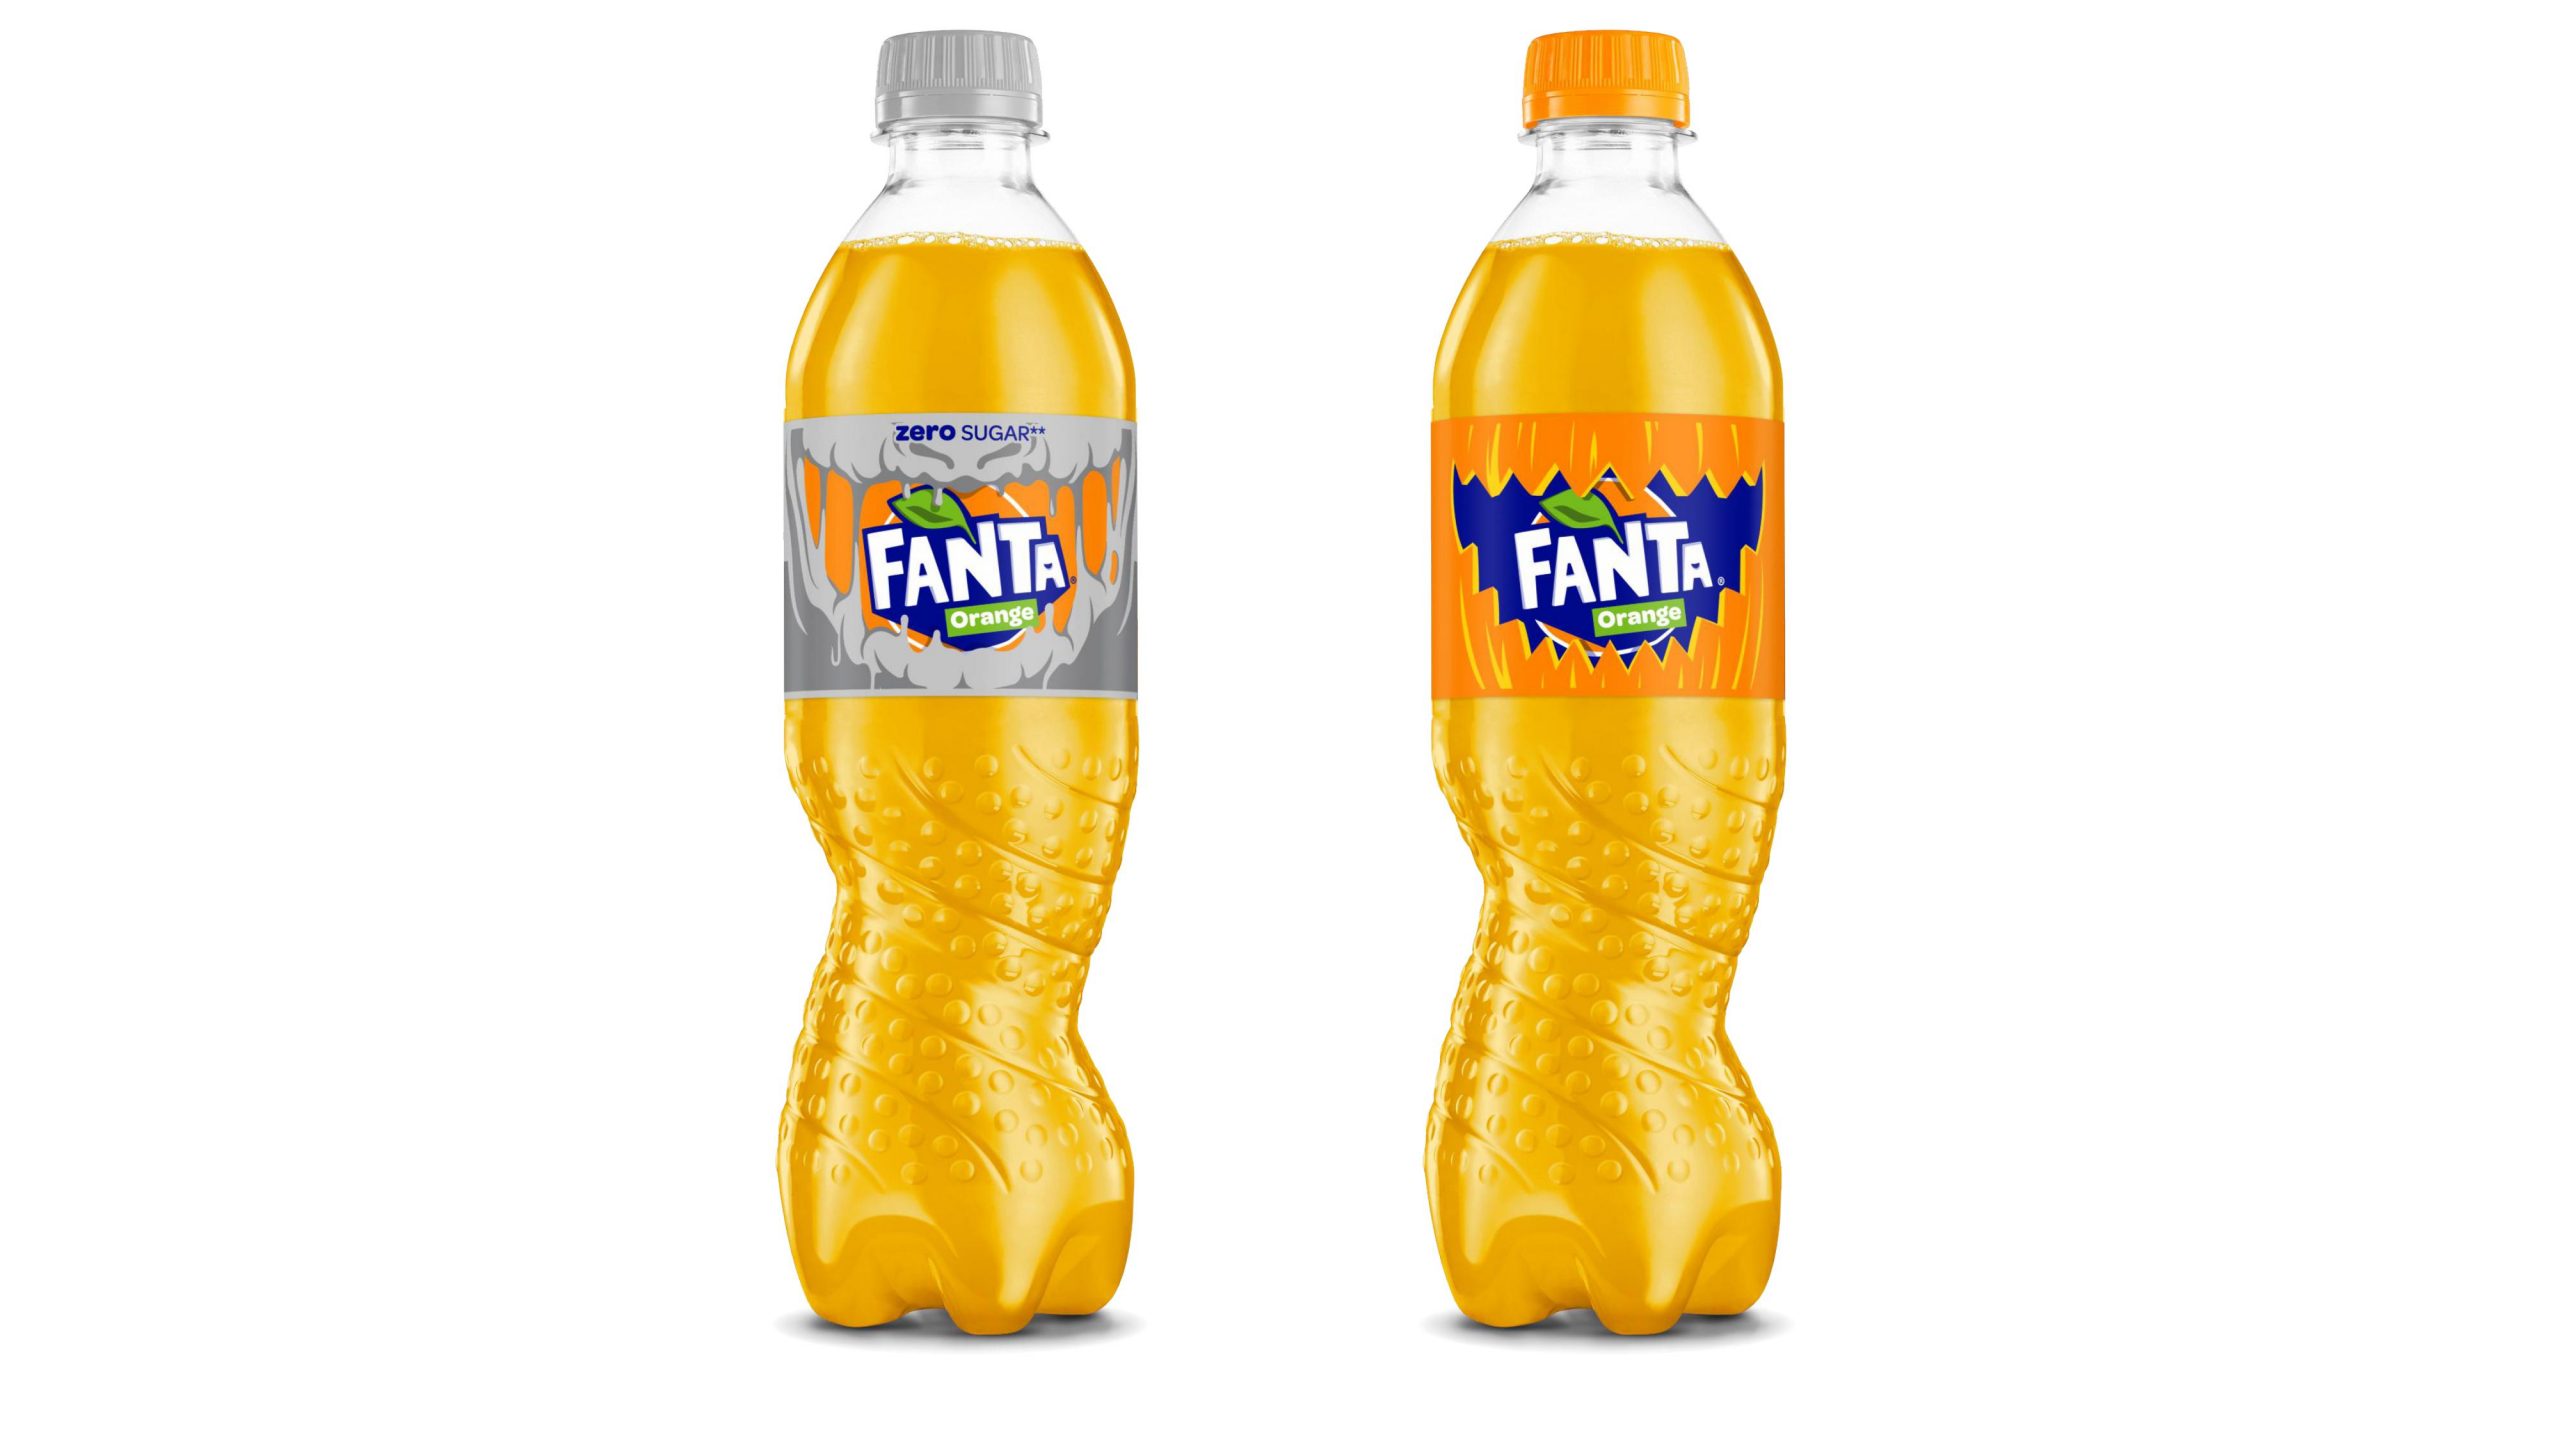 Fanta dares shoppers with new on-pack Hallowe’en game